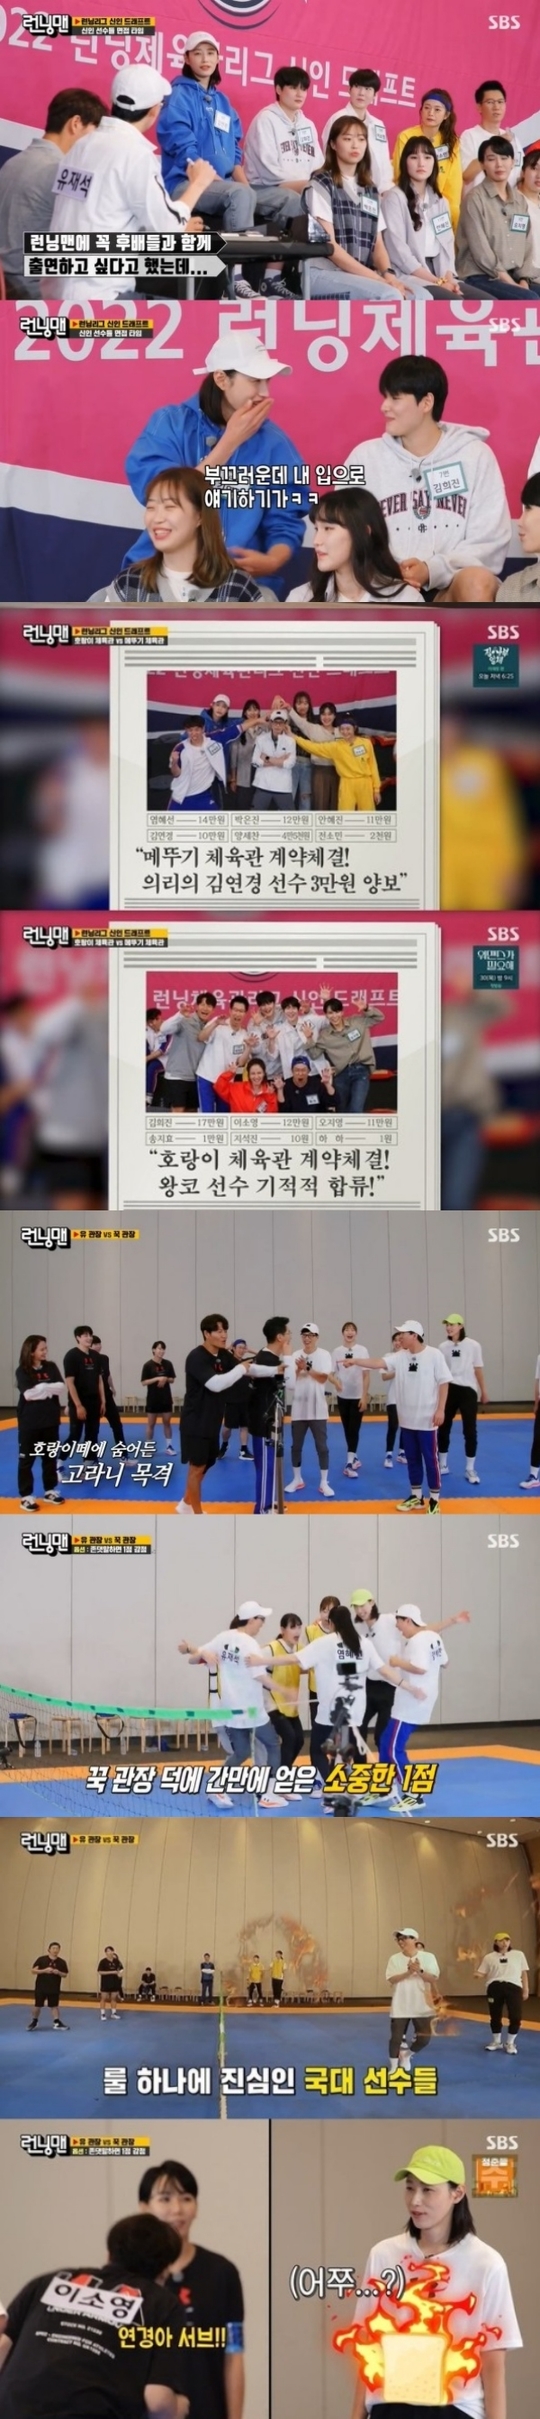 SBS Running Man, which was launched by the womens volleyball team, which gave a hot impression at the 2020 Tokyo Olympic Games, recorded high TV viewer ratings with a hot smile.Running Man, which was broadcast on September 26, ranked first in entertainment in the same time zone with 6.3% of TV viewer ratings (hereinafter based on Nielsen Korea Seoul Capital Area), and 4.2% of 2049 TV viewer ratings, the main indicator and target indicator of advertisers, was shown. Total Area (based on furniture) recorded the top spot in the same time zone as well as the top spot in Sunday entertainment, and the highest TV viewer ratings per minute jumped to 9.4%.The show was decorated with the UEFA Champions League rookie draft, and the womens volleyball team Kim Yeon-koung, Kim Hee-jin, Oh Ji-young, Yeum Hye-Seon, Park Eun-jin, Ahn Hye-jin and Lee So-young appeared The sun cheered everyone.Kim Yeon-koung said, I hear a lot of stories about Lee Kwang-soo, and I will fill the vacancy today.The draft, which consisted of a surprise progress by the caster, was made by Yoo Jae-Suk, who was reborn as the director according to the results of the race last week, along with Kim Jong-kook, the head of the Hung-Kwan.Kim Jong-kook had to negotiate Salary with the players with 990,000 One, Yoo Jae-Suk silver 1.3 million One, and the players had to have a volleyball before the draft and have to be evaluated by Choices for speed and playing.If Running Man members laughed, the volleyball team players showed off their ability to play well by showing fast spikes.Kim Hee-jin, who showed 70km / h, chose to go to the tiger gym at the top Salary 170,000 One, and Oh Ji Young, Lee So Young, Haha, Ji Suk-jin and Song Ji-hyo also joined.Kim Yeon-koung, 60km/h, offered his Salary 30,000 One to join Yang Se-chan to Choices the Grasshop Gym.Park Eun-jin, Yeum Hye-Seon, Ahn Hye-jin and Jeon So-min also headed to the grasshopper gym.The first Battle was a football: a hand-held Libero, with both teams Choices Haha and Kim Yeon-koung and added tension to the intense rally from the start.However, unexpected options Do not write honorific words emerged as a variable, and Kim Jong-kook and Yoo Jae-Suk, the two team managers, fell into Kim Jong-kook and Yoo Jae-Suk were reprimanded for each mistake, and each time they scored, they were tired of the energy of the players who showed that world tension and predicted a tough battle in the future.